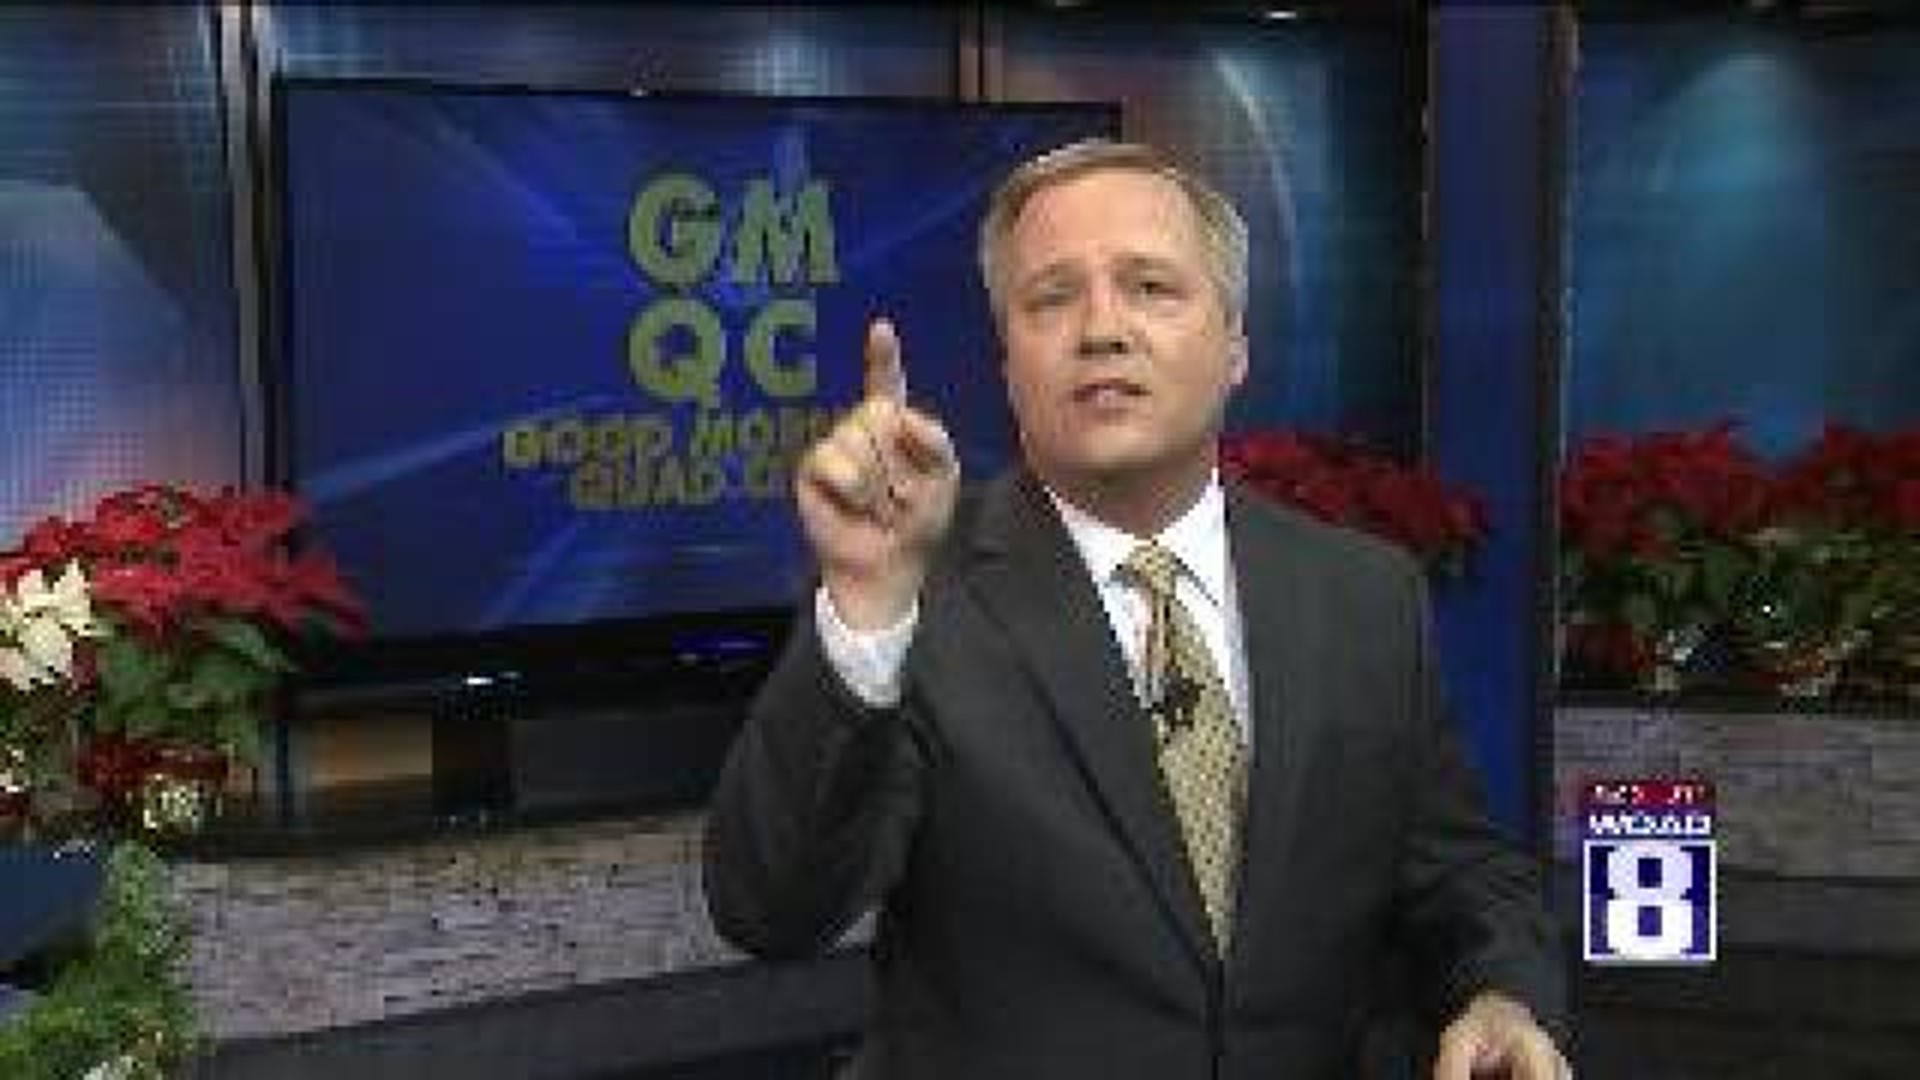 Happy New Year from Good Morning Quad Cities